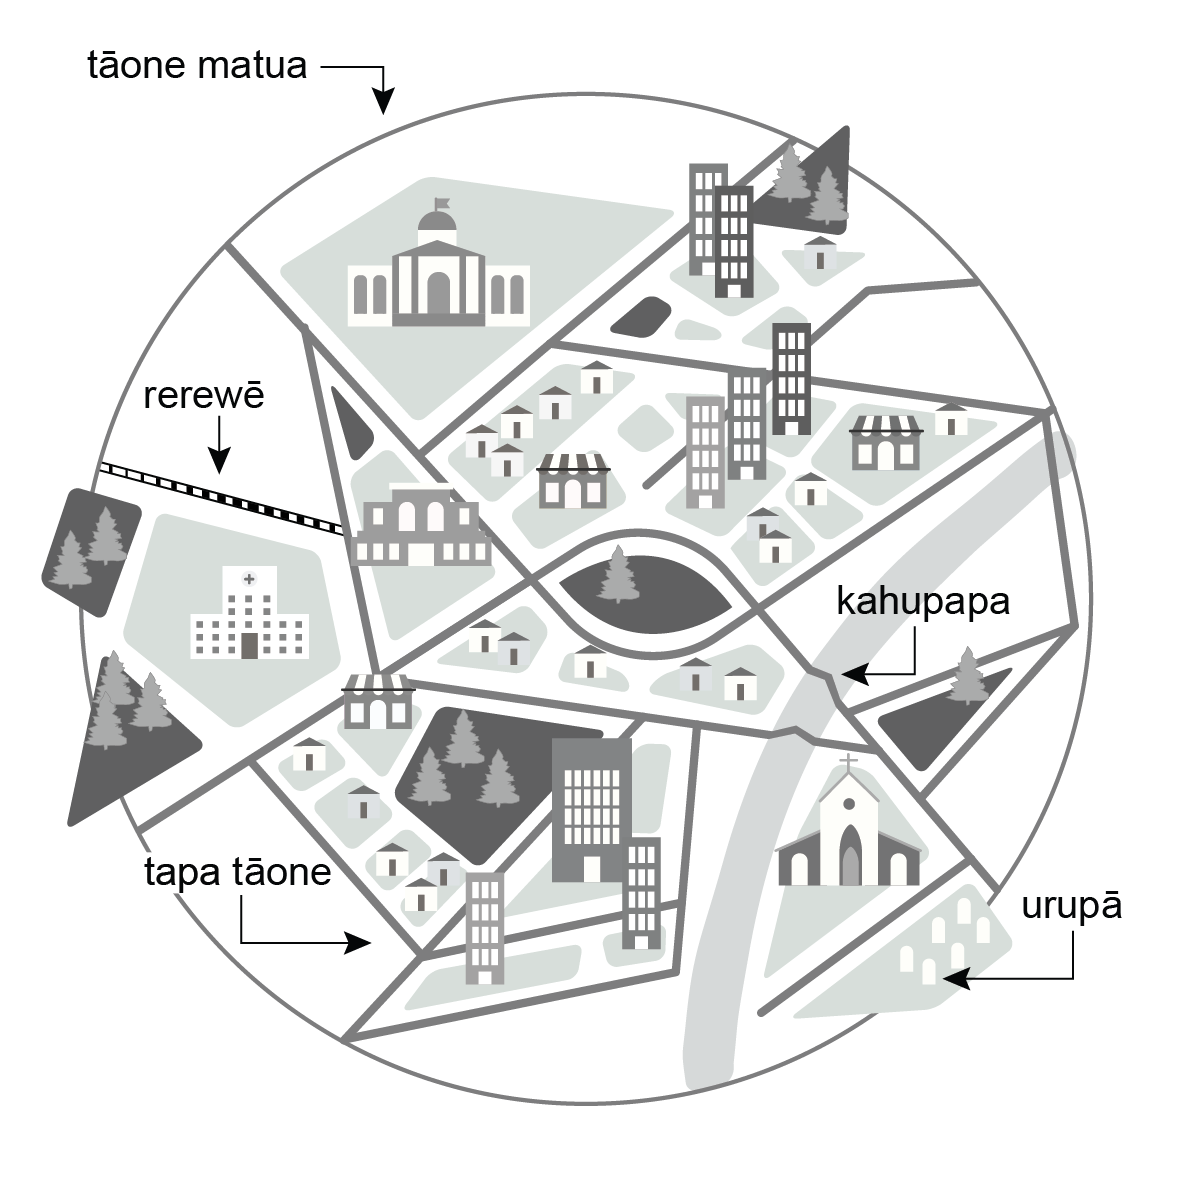 Drawing of a circle containing geometric shapes that contain symbols of buildings, houses, trees, a graveyard and railway line. 